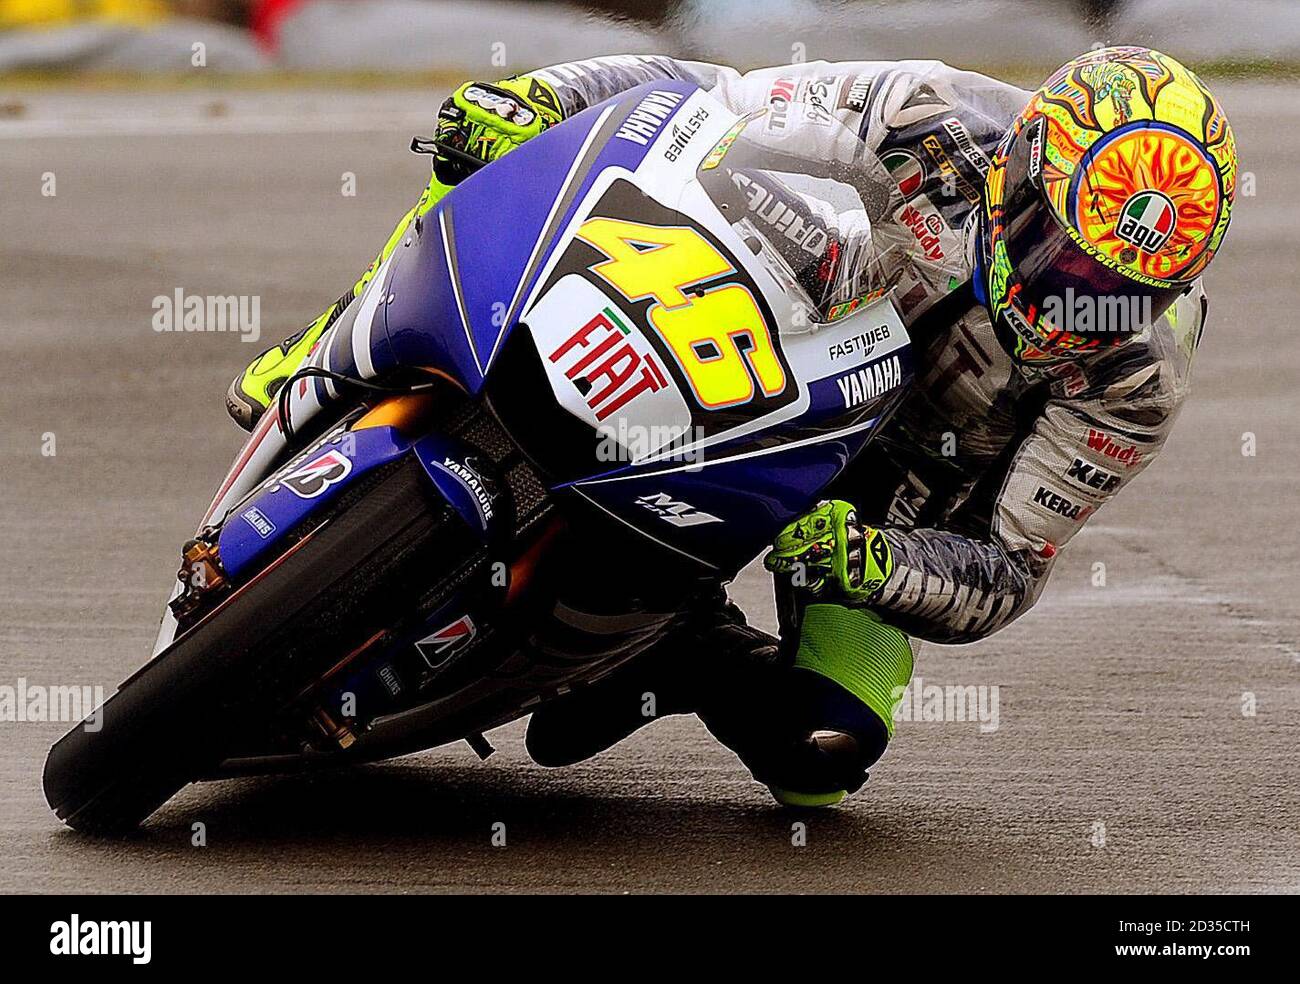 Yamaha's Italian rider Valentino Rossi qualifies in second place for tomorrow's British MotoGP Grand Prix at Donington Park. Stock Photo